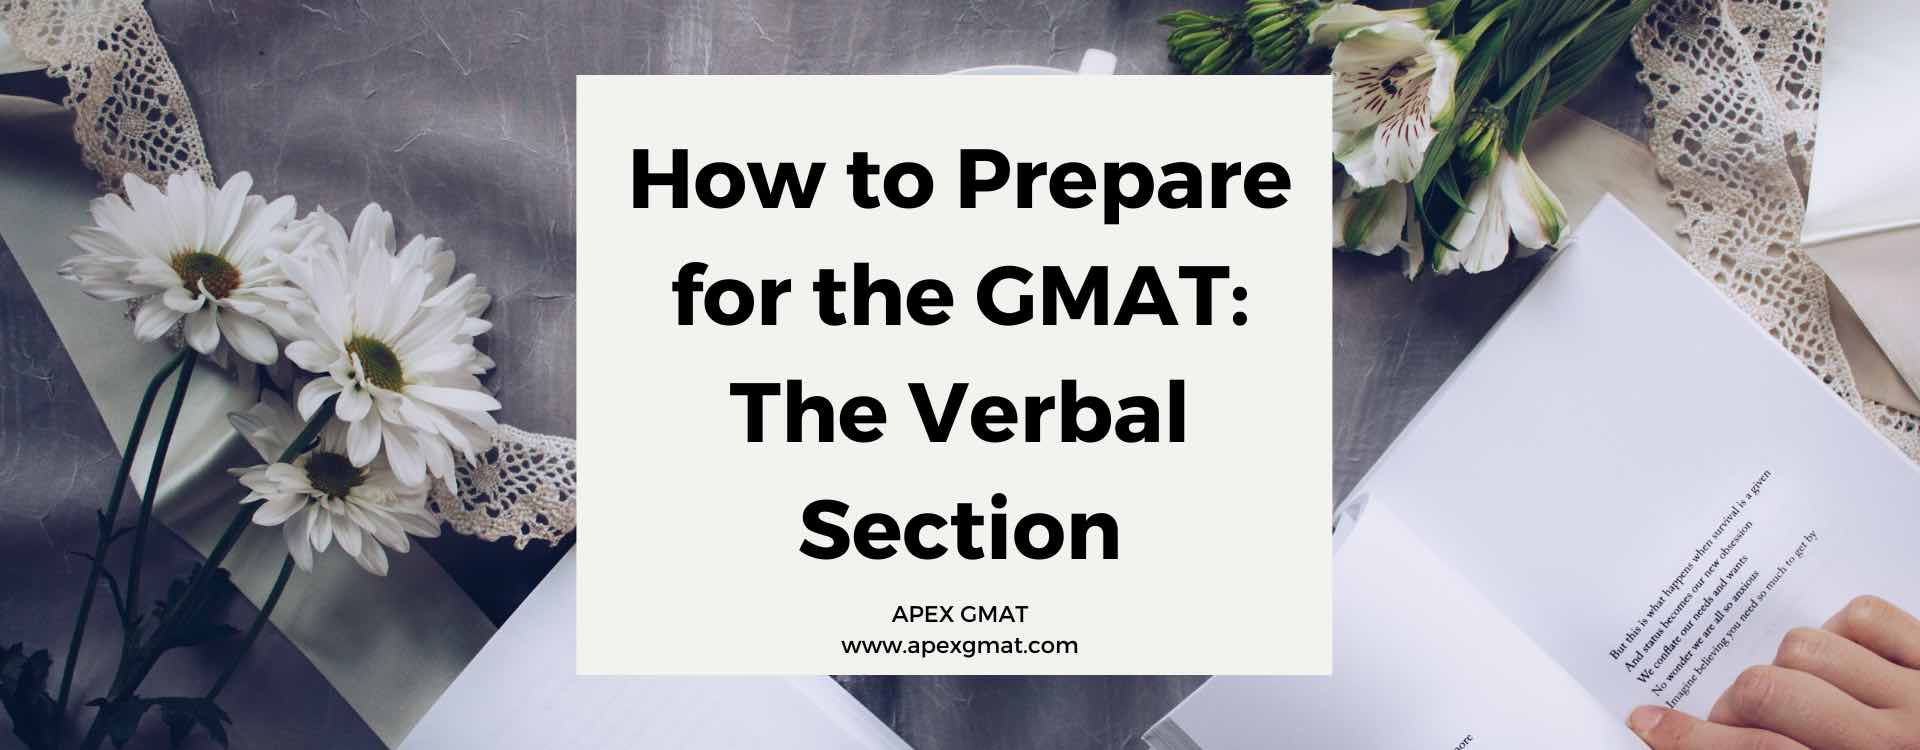 How to Prepare for the GMAT: The Verbal Section